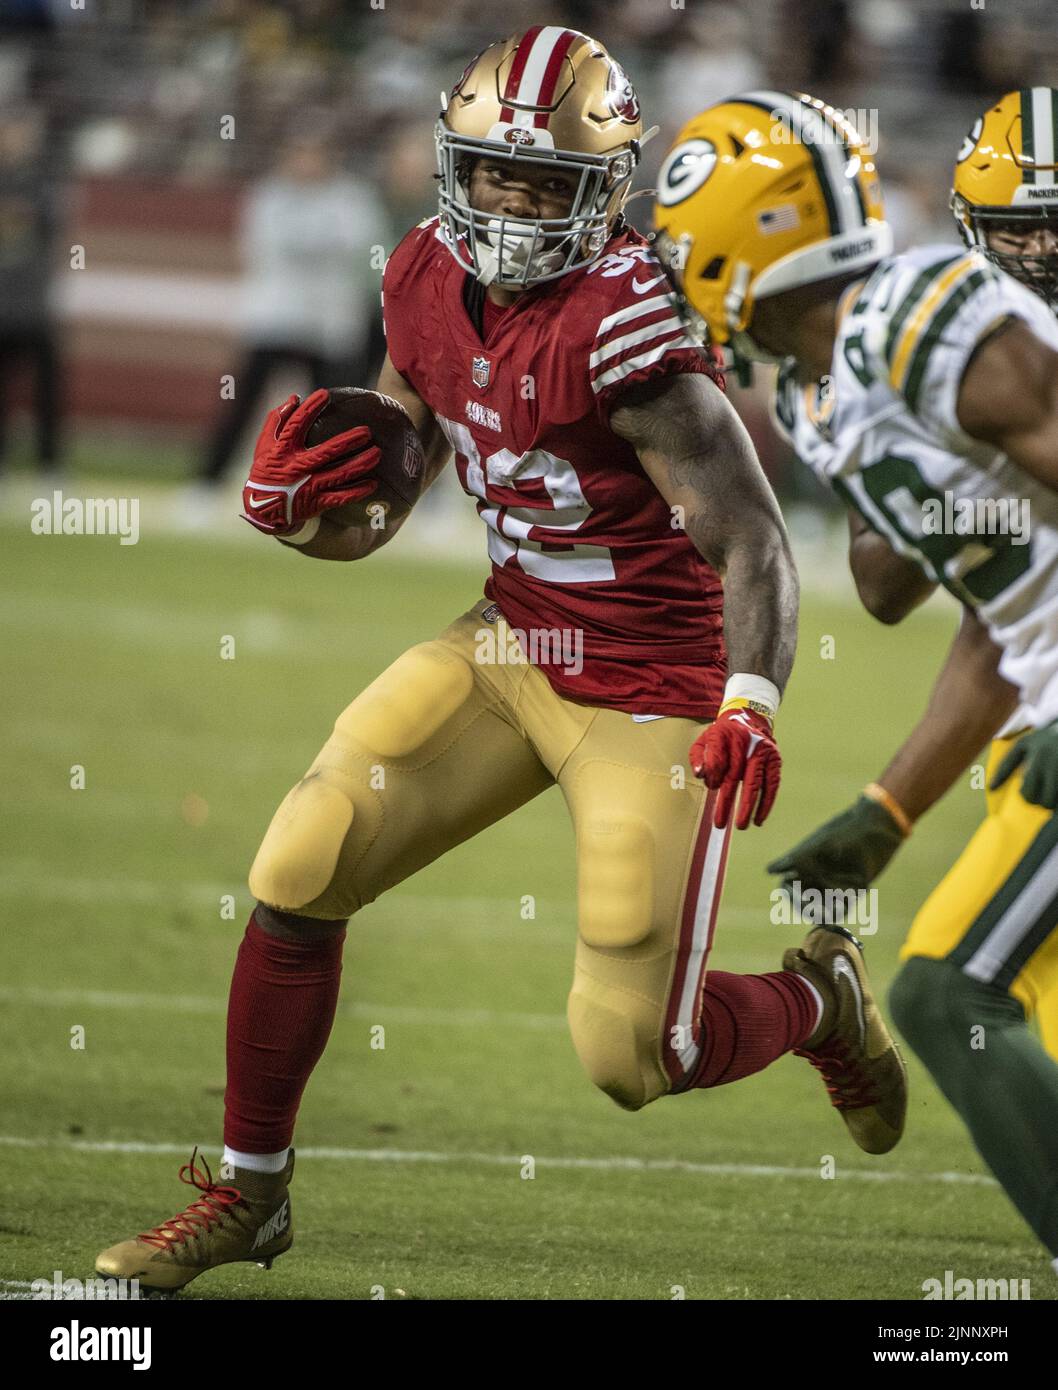 Santa Clara, USA. 13th Aug, 2022. San Francisco 49ers running back Tyrion Davis-Price (32) runs against the Green Bay Packers in the fourth quarter at Levi's Stadium in Santa Clara, California on Friday, August 12, 2022. The 49ers defeated the Packers 28-21 in their first preseason game Photo by Terry Schmitt/UPI Credit: UPI/Alamy Live News Stock Photo